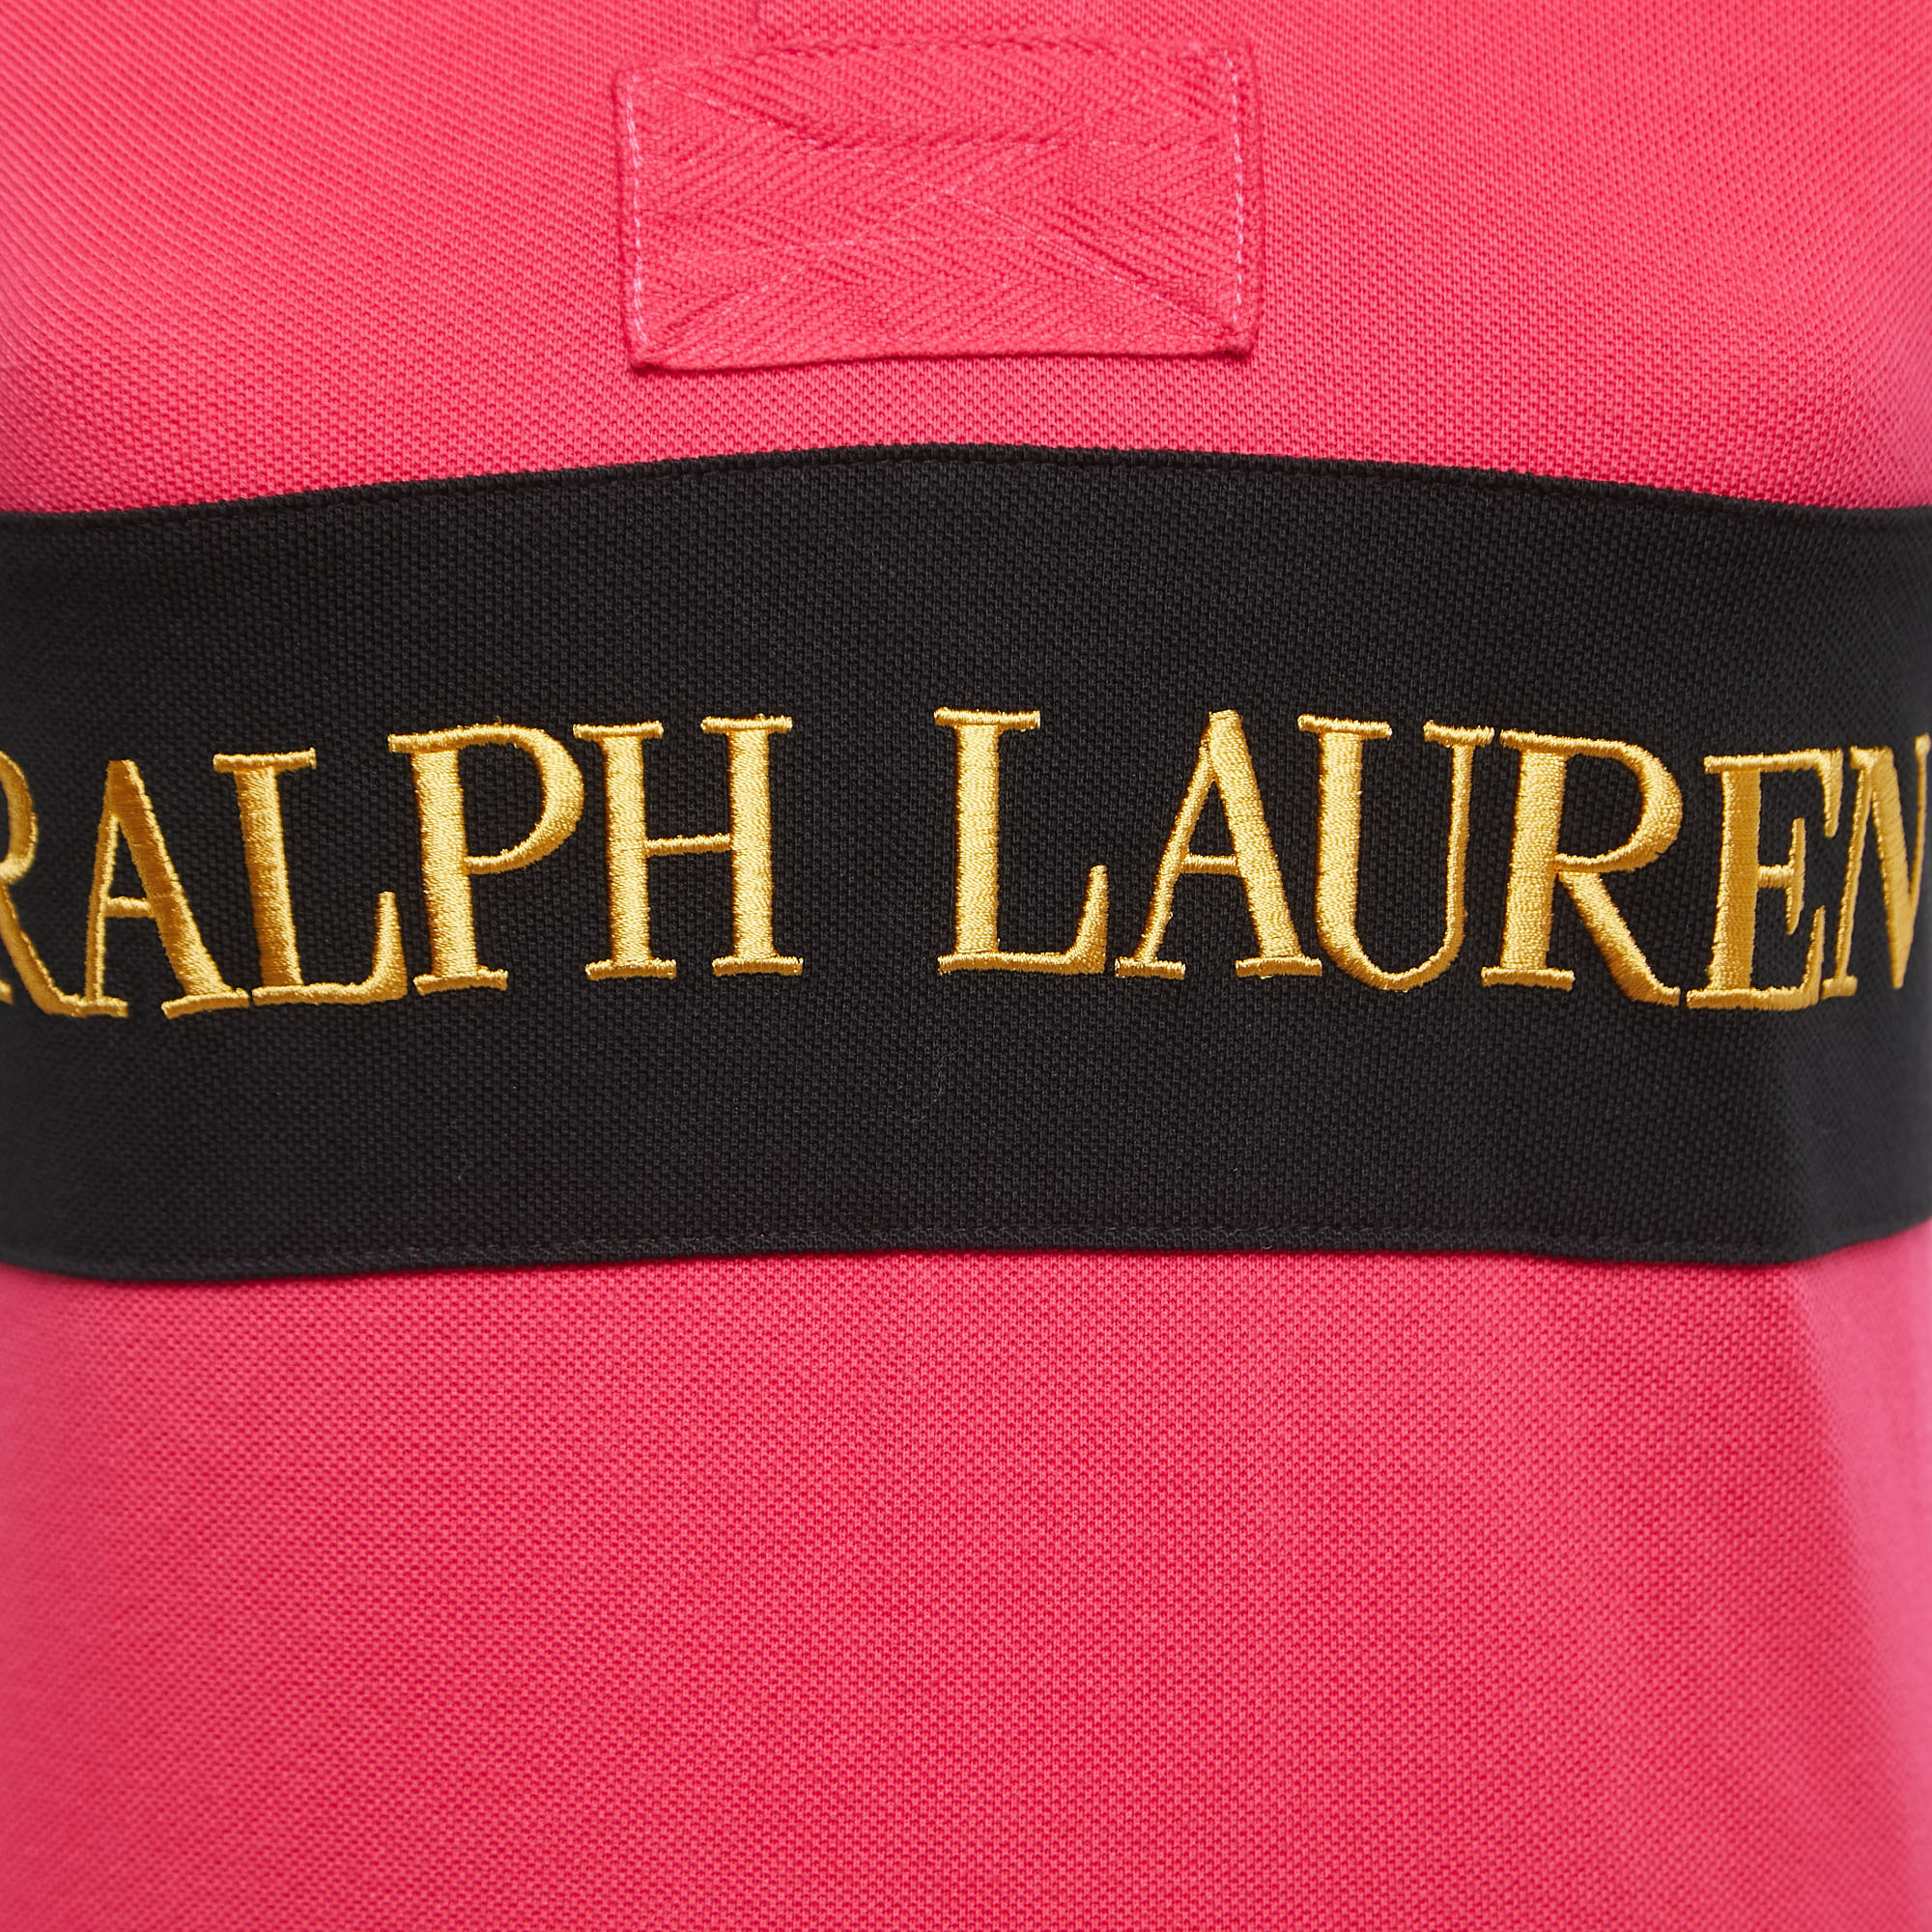 Polo Ralph Lauren Pink Embroidered Cotton Pique Polo T-Shirt XS